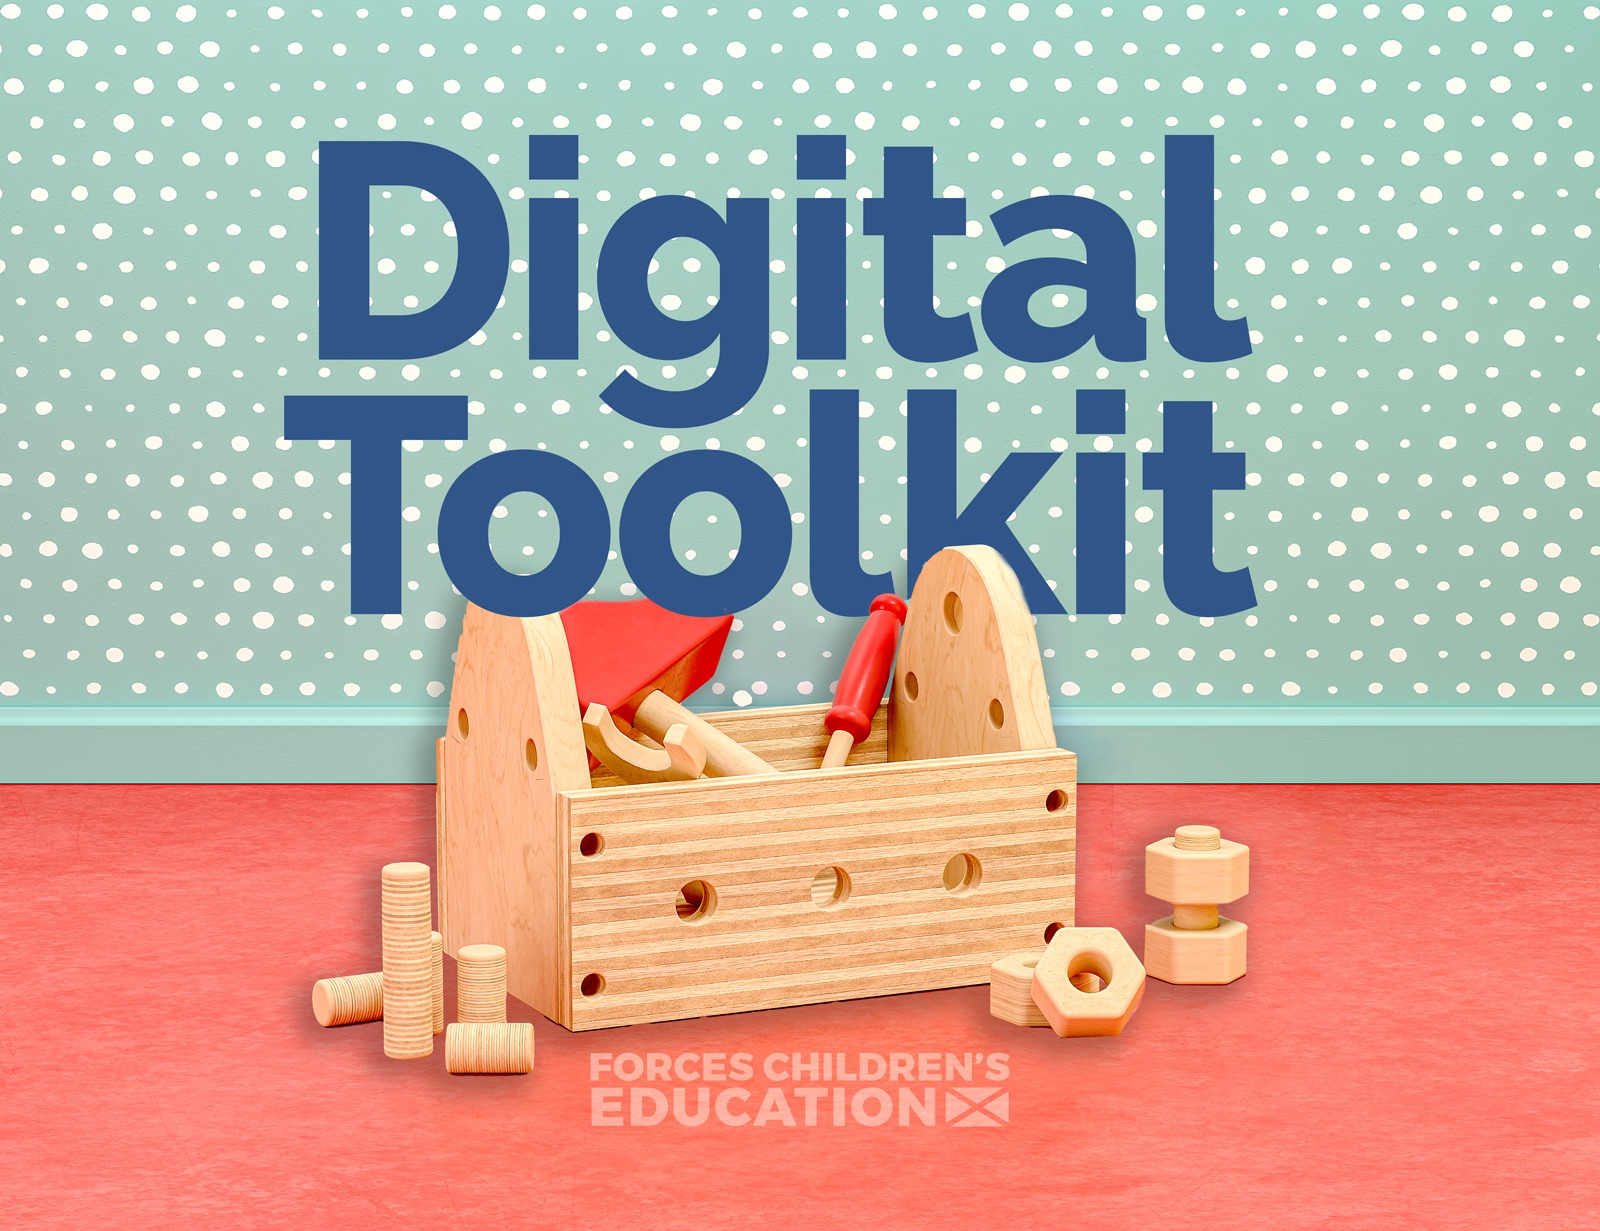 A kid's wooden toolkit with digital toolkit written above it.